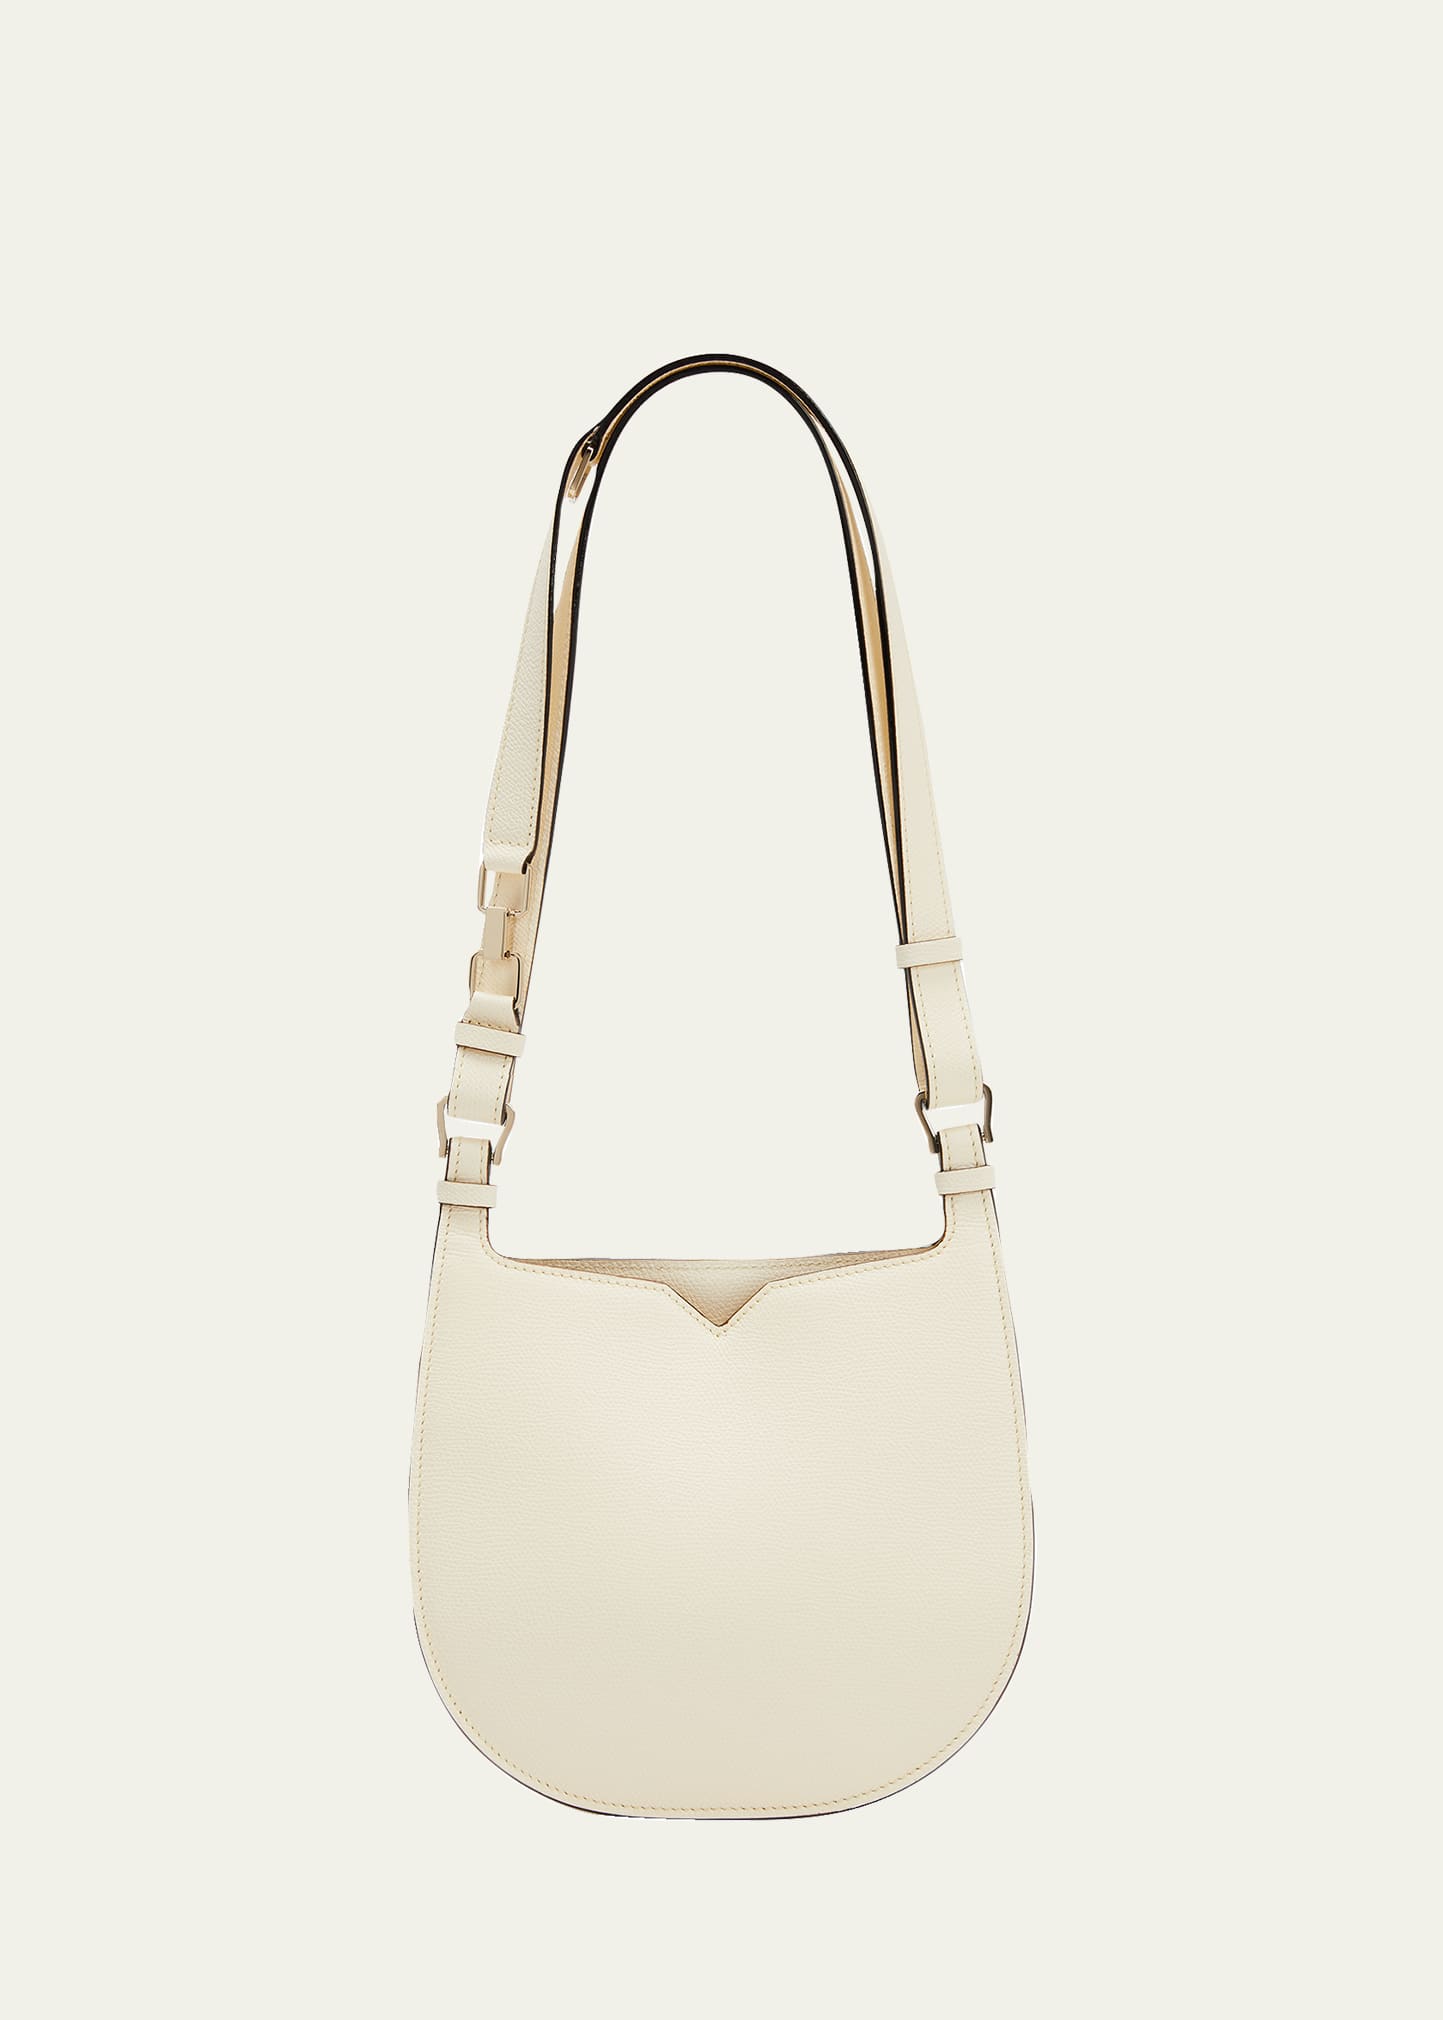 Valextra The Hobo Weekend Small Saddle Bag In Ww White